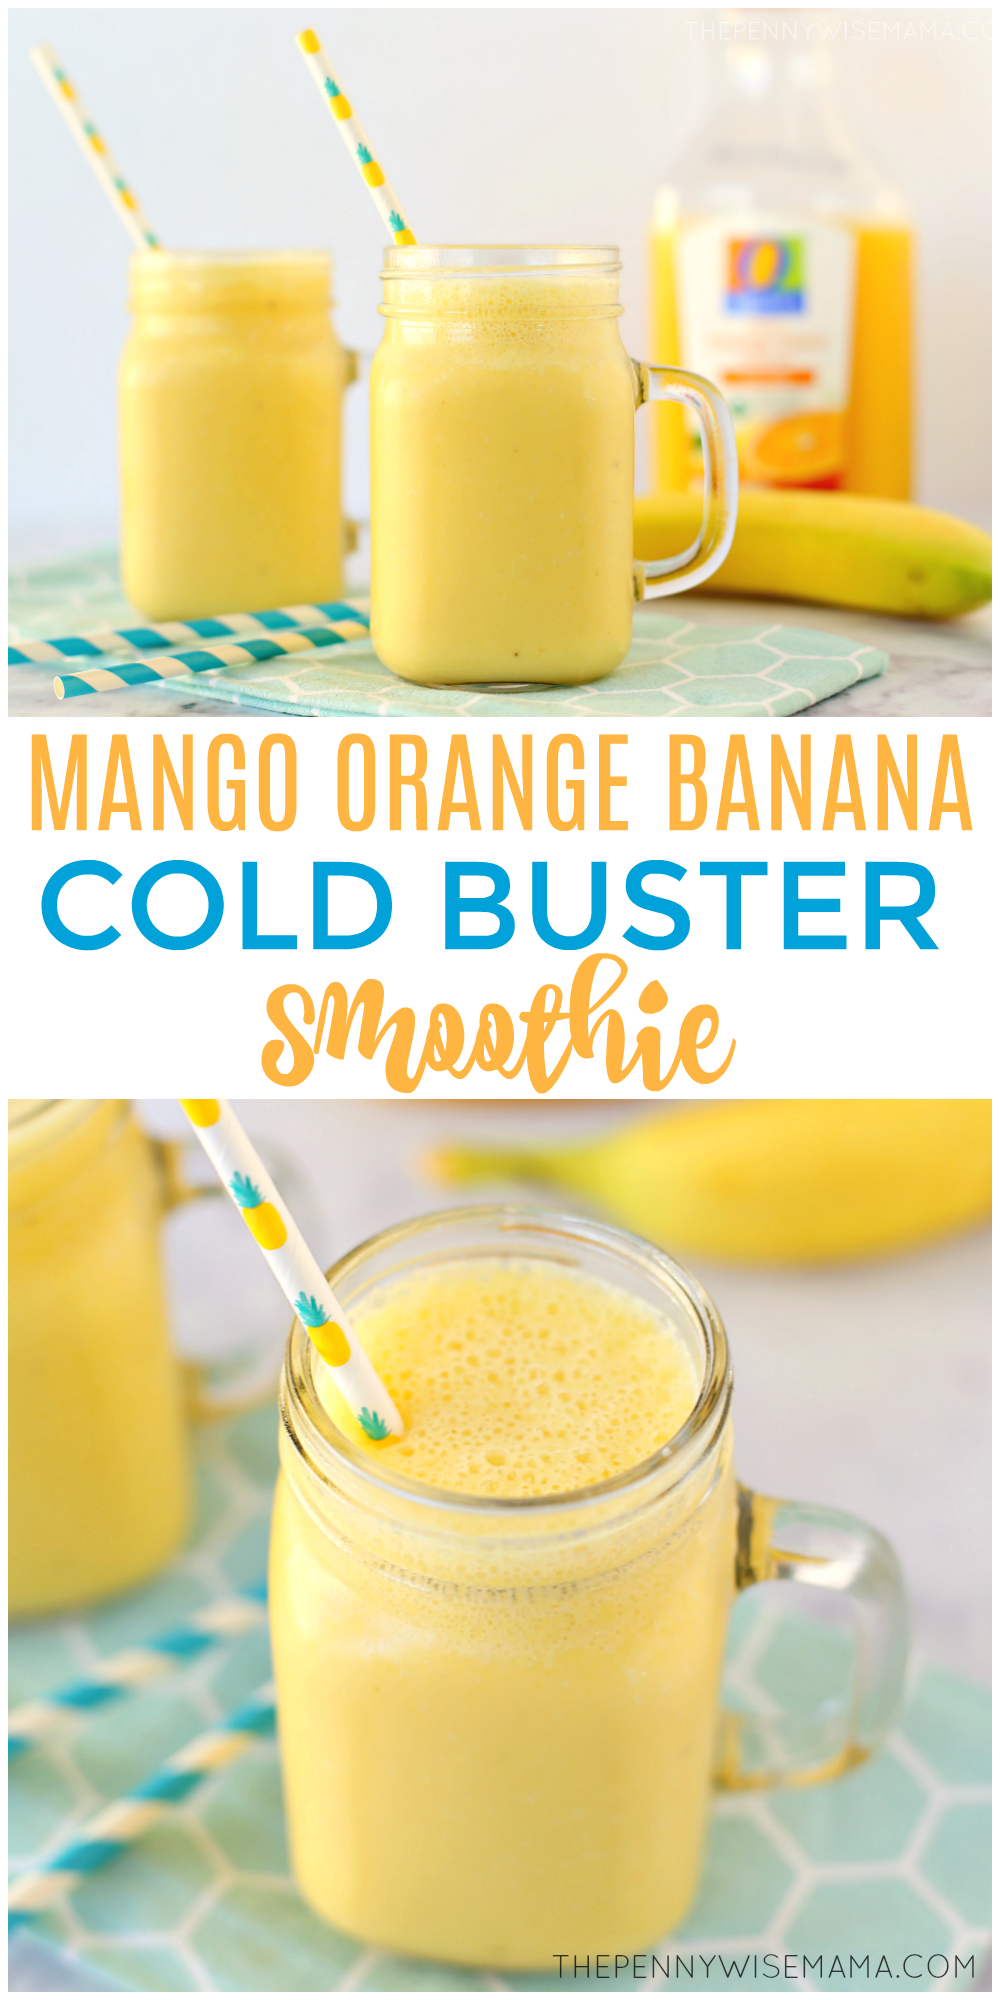 This Mango Orange Banana Cold Buster Smoothie is packed full of cold and flu fighting ingredients to keep you nourished and healthy during cold and flu season. It’s delicious and simple to make! Click the image to grab the full recipe.